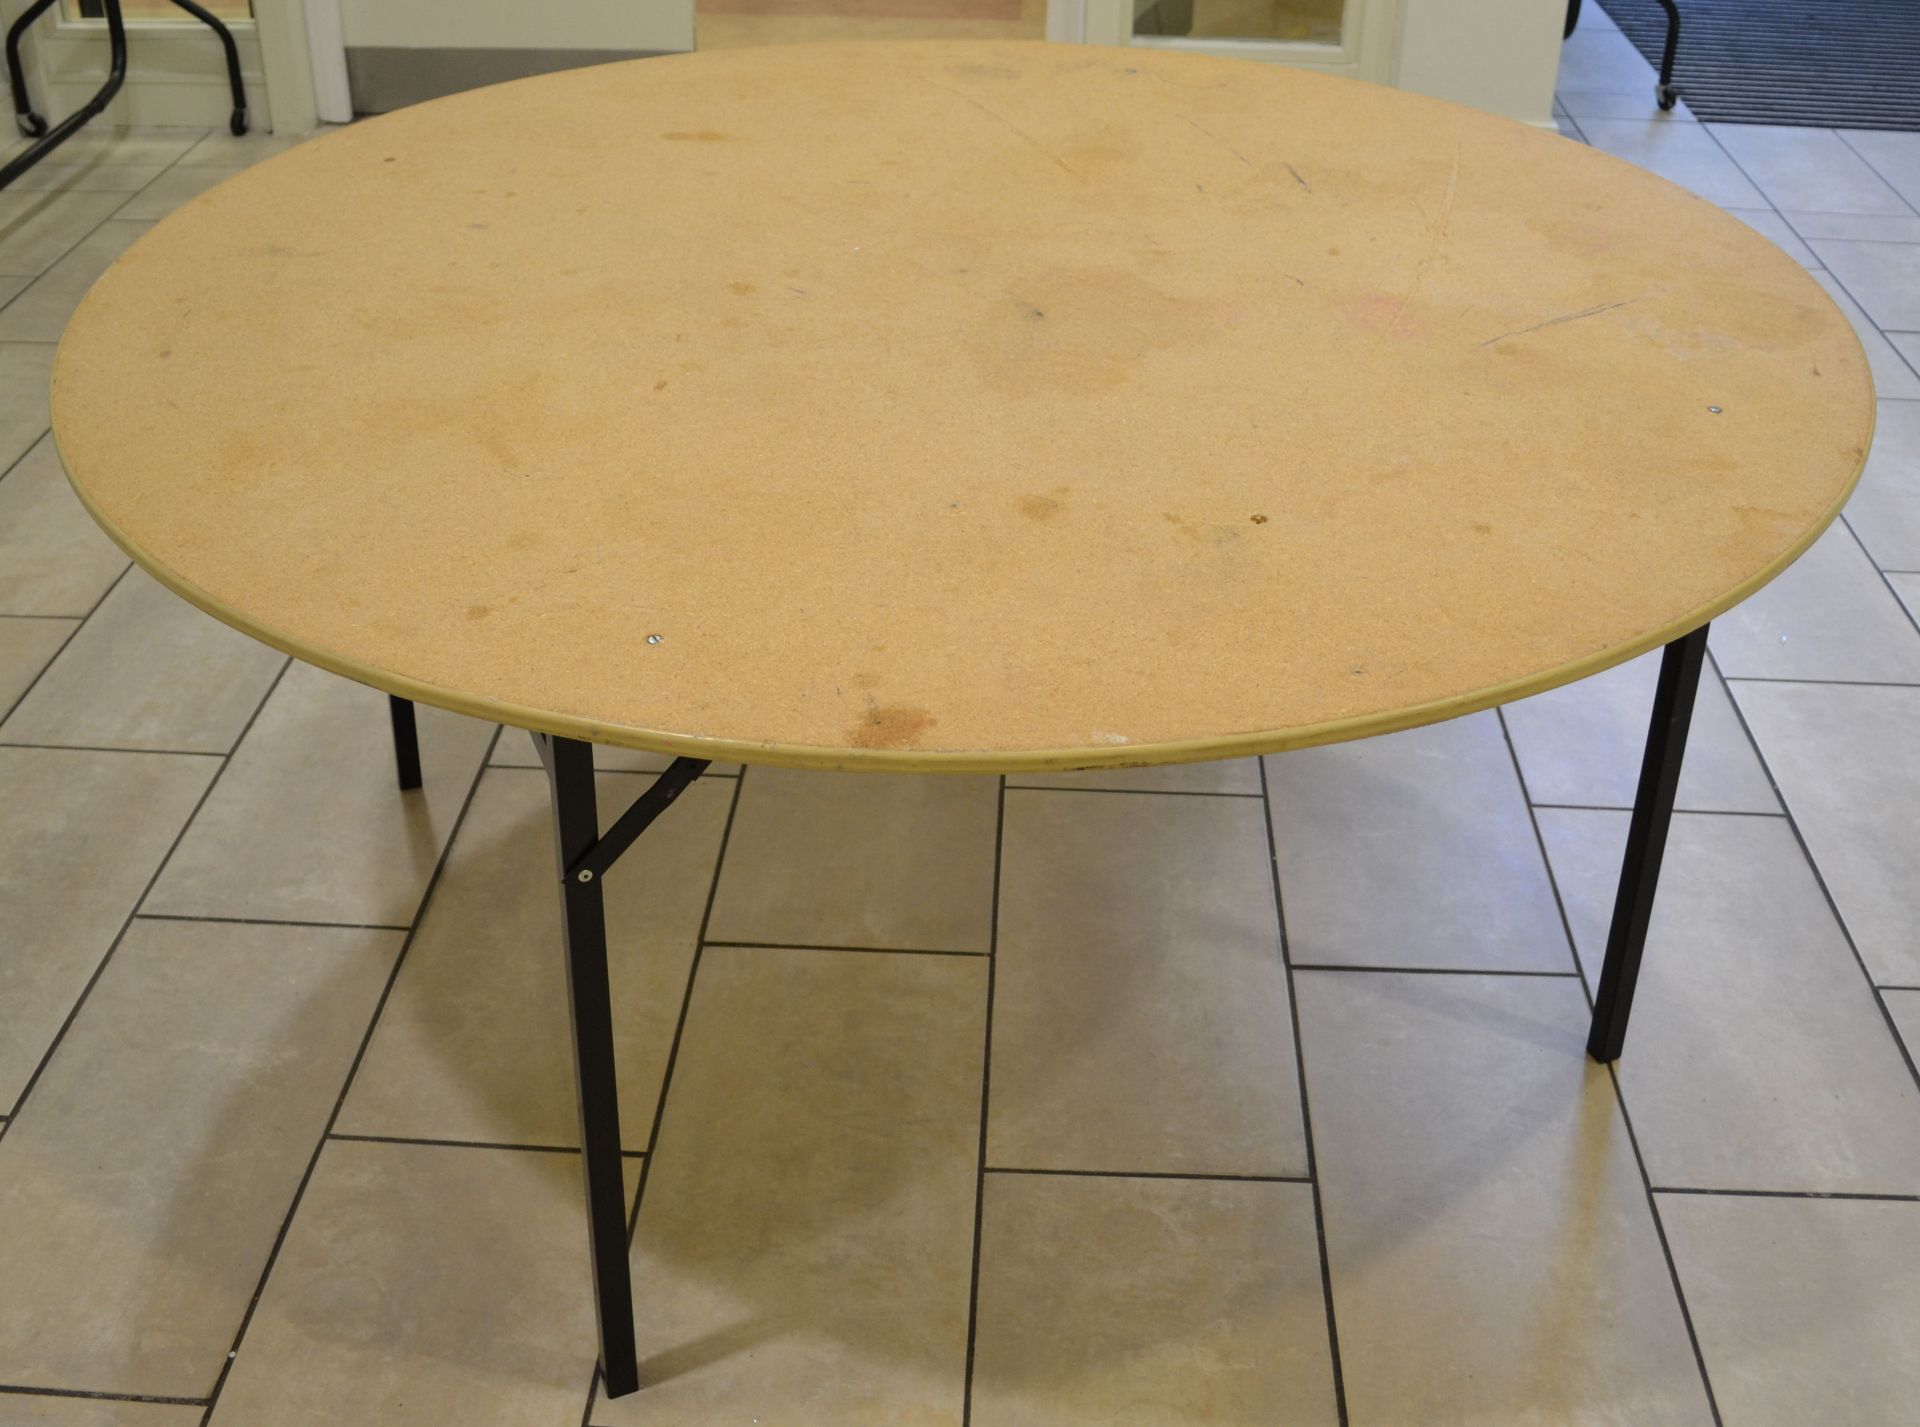 4 x 5 Foot Folding Round Banqueting Tables - CL152 - Location: Altrincham WA14 With a rubber-edged - Image 3 of 12